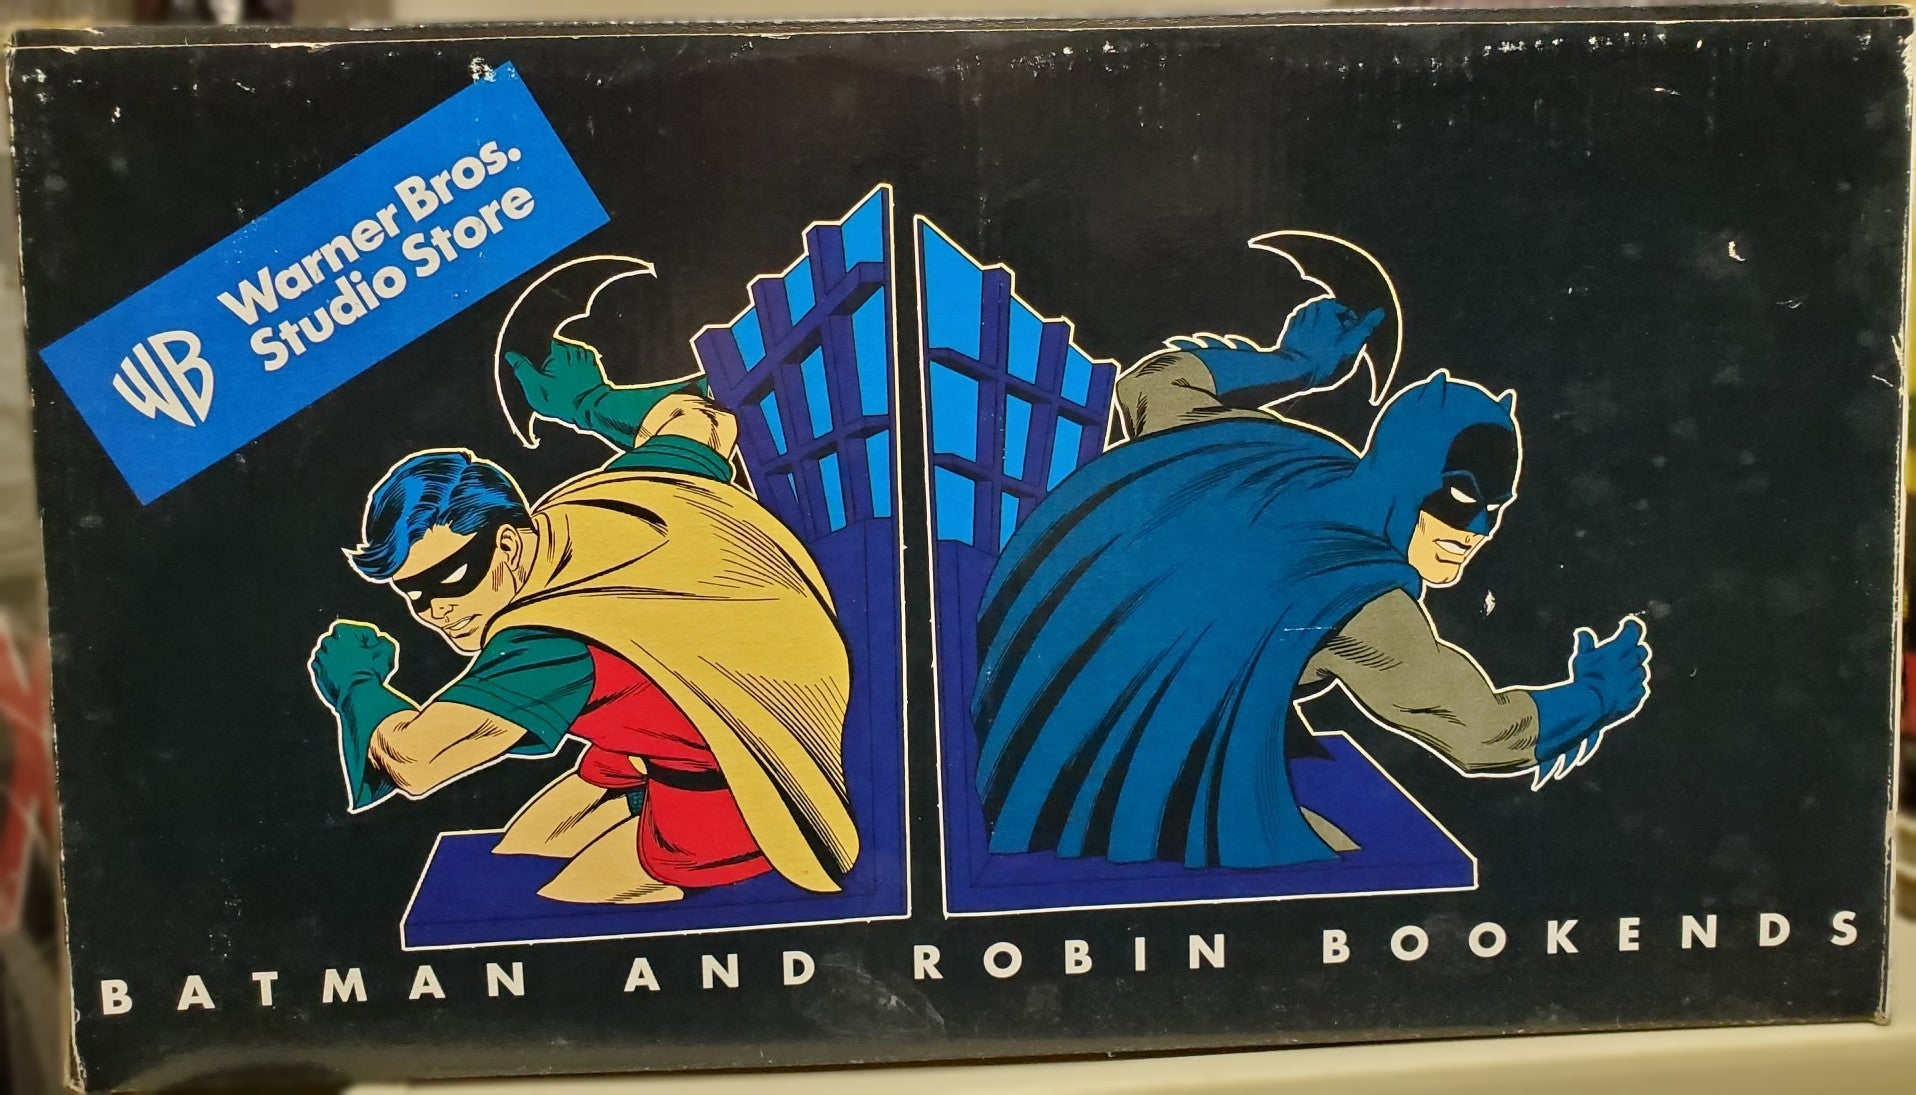 Batman and Robin Bookends 